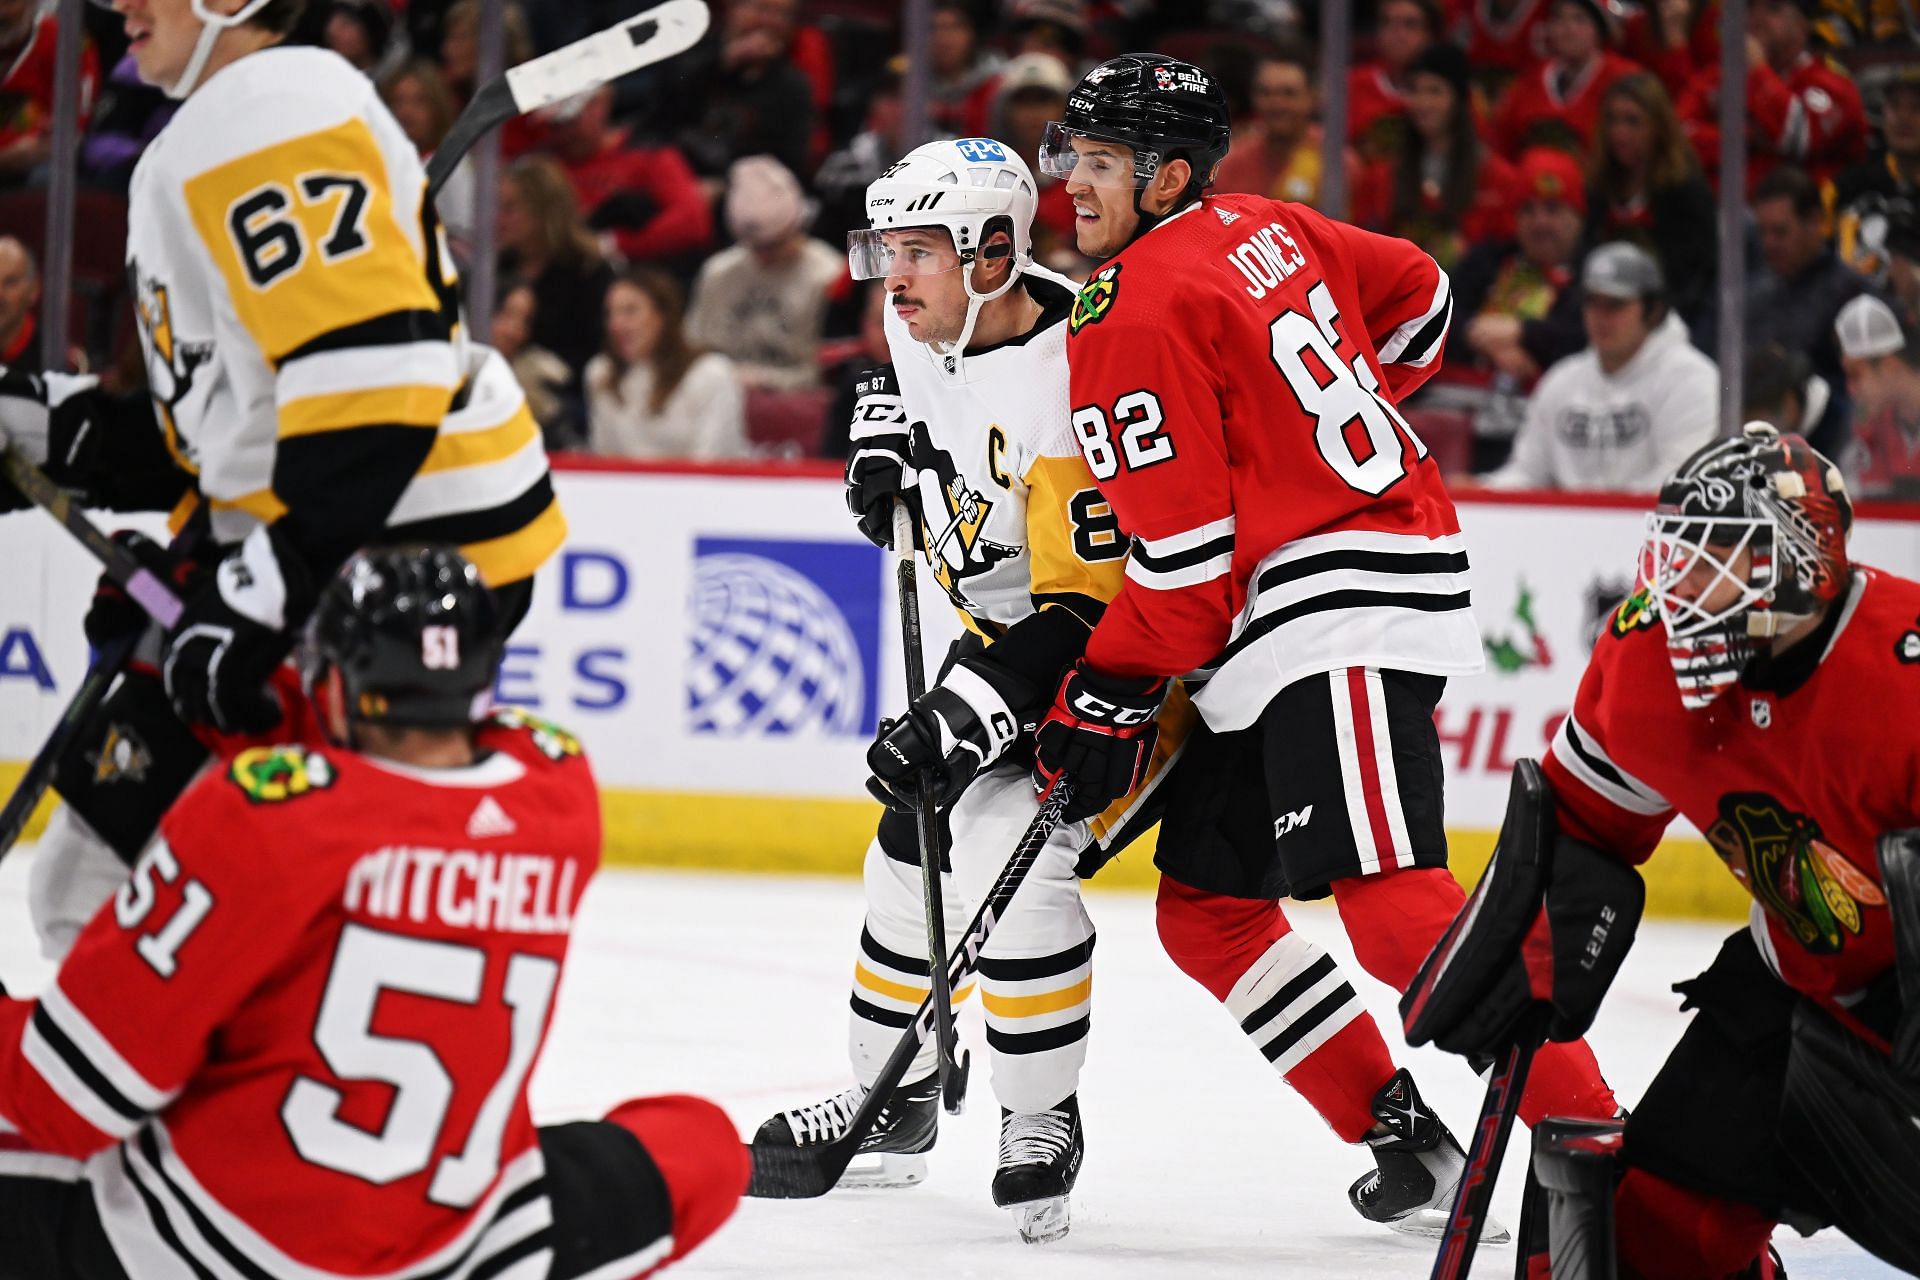 Pittsburgh Penguins v Chicago Blackhawks Live streaming options, how and where to watch NHL live on TV, channel list, and more